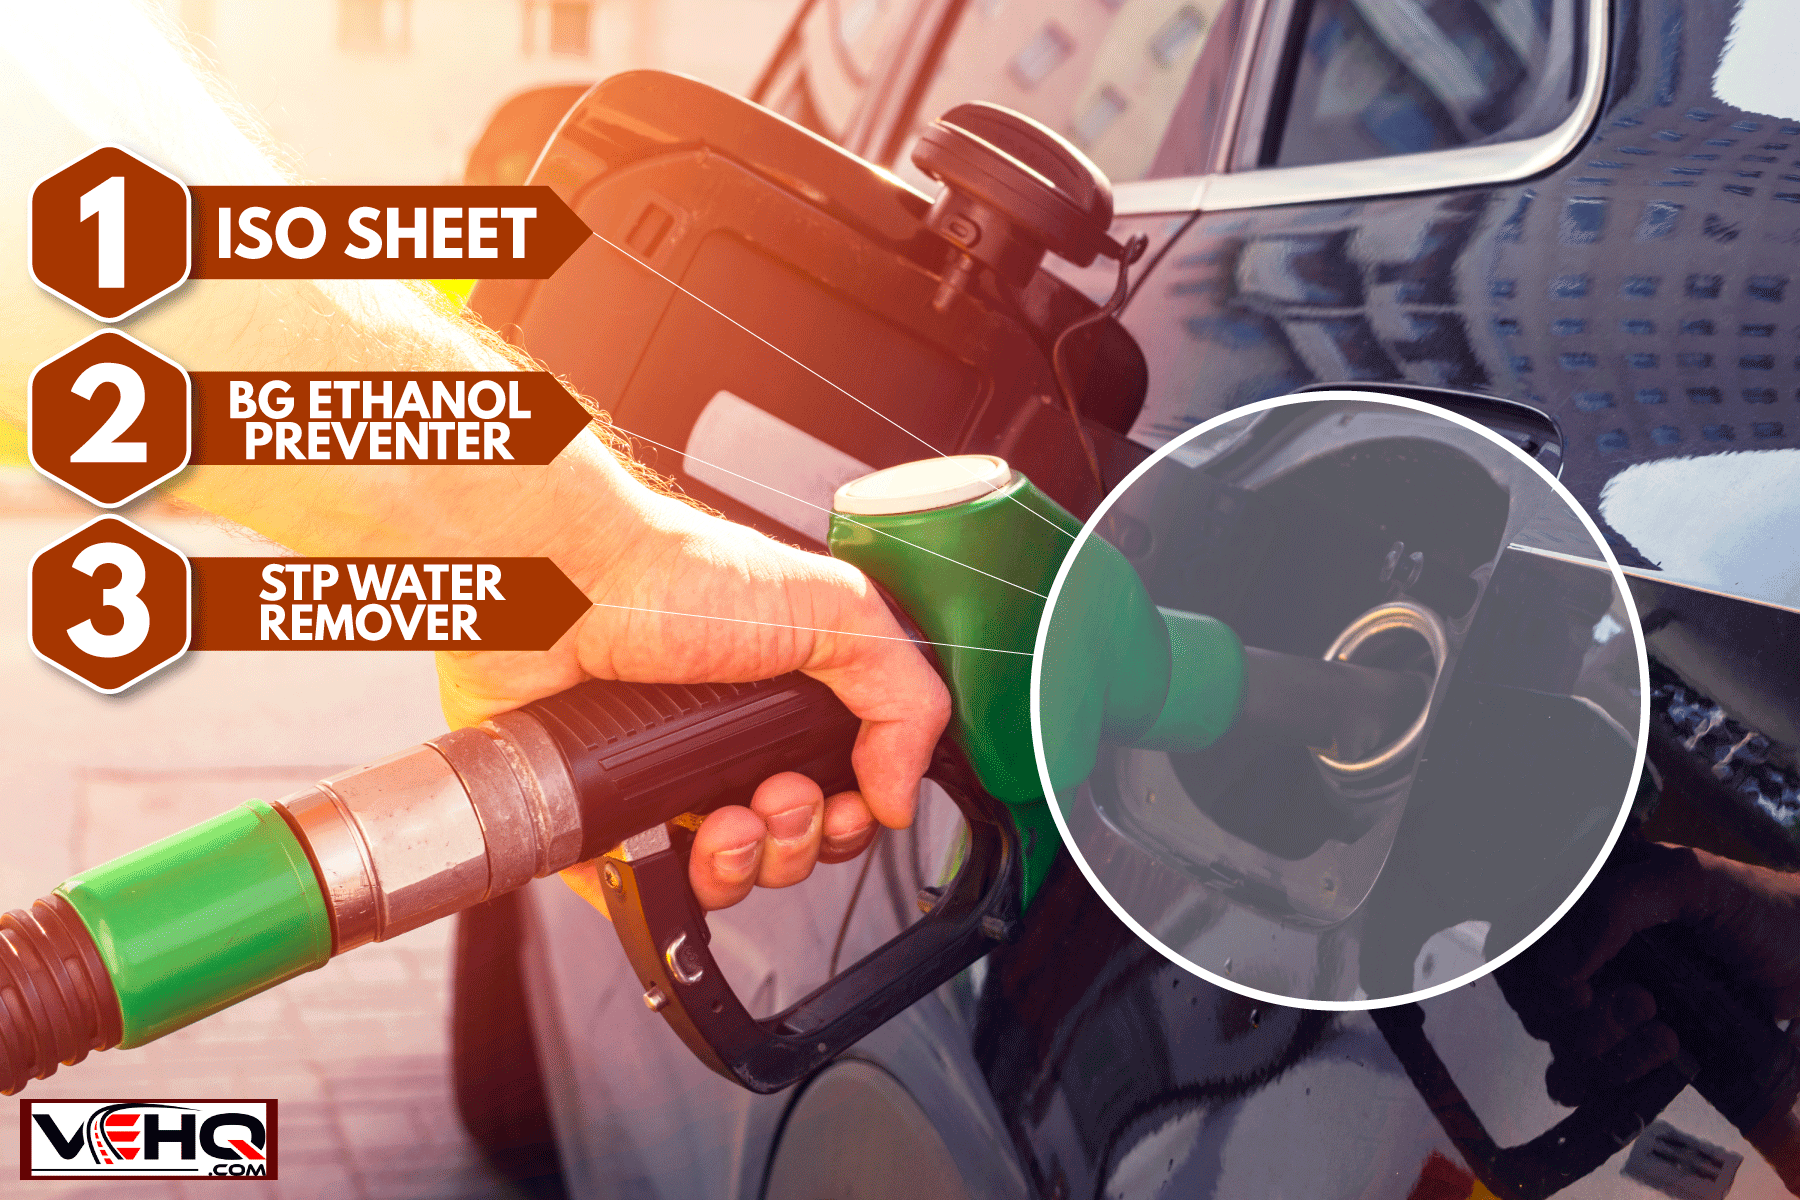 Gassing up at the gas station, 3 Best Additives To Remove Water From Gas Tank